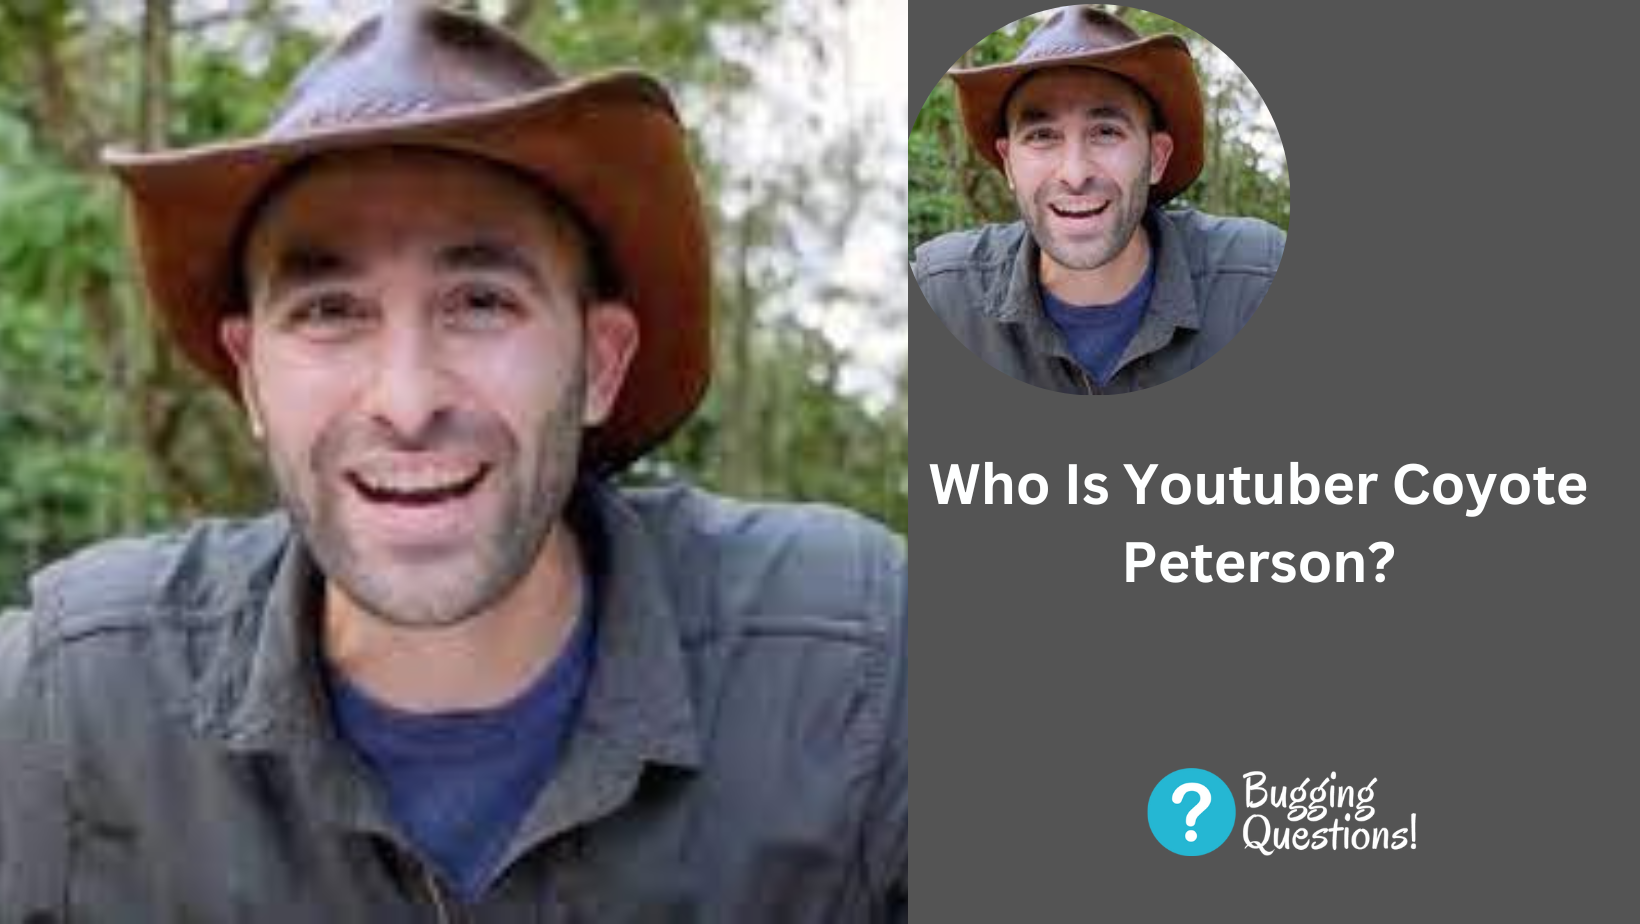 Who Is Youtuber Coyote Peterson?